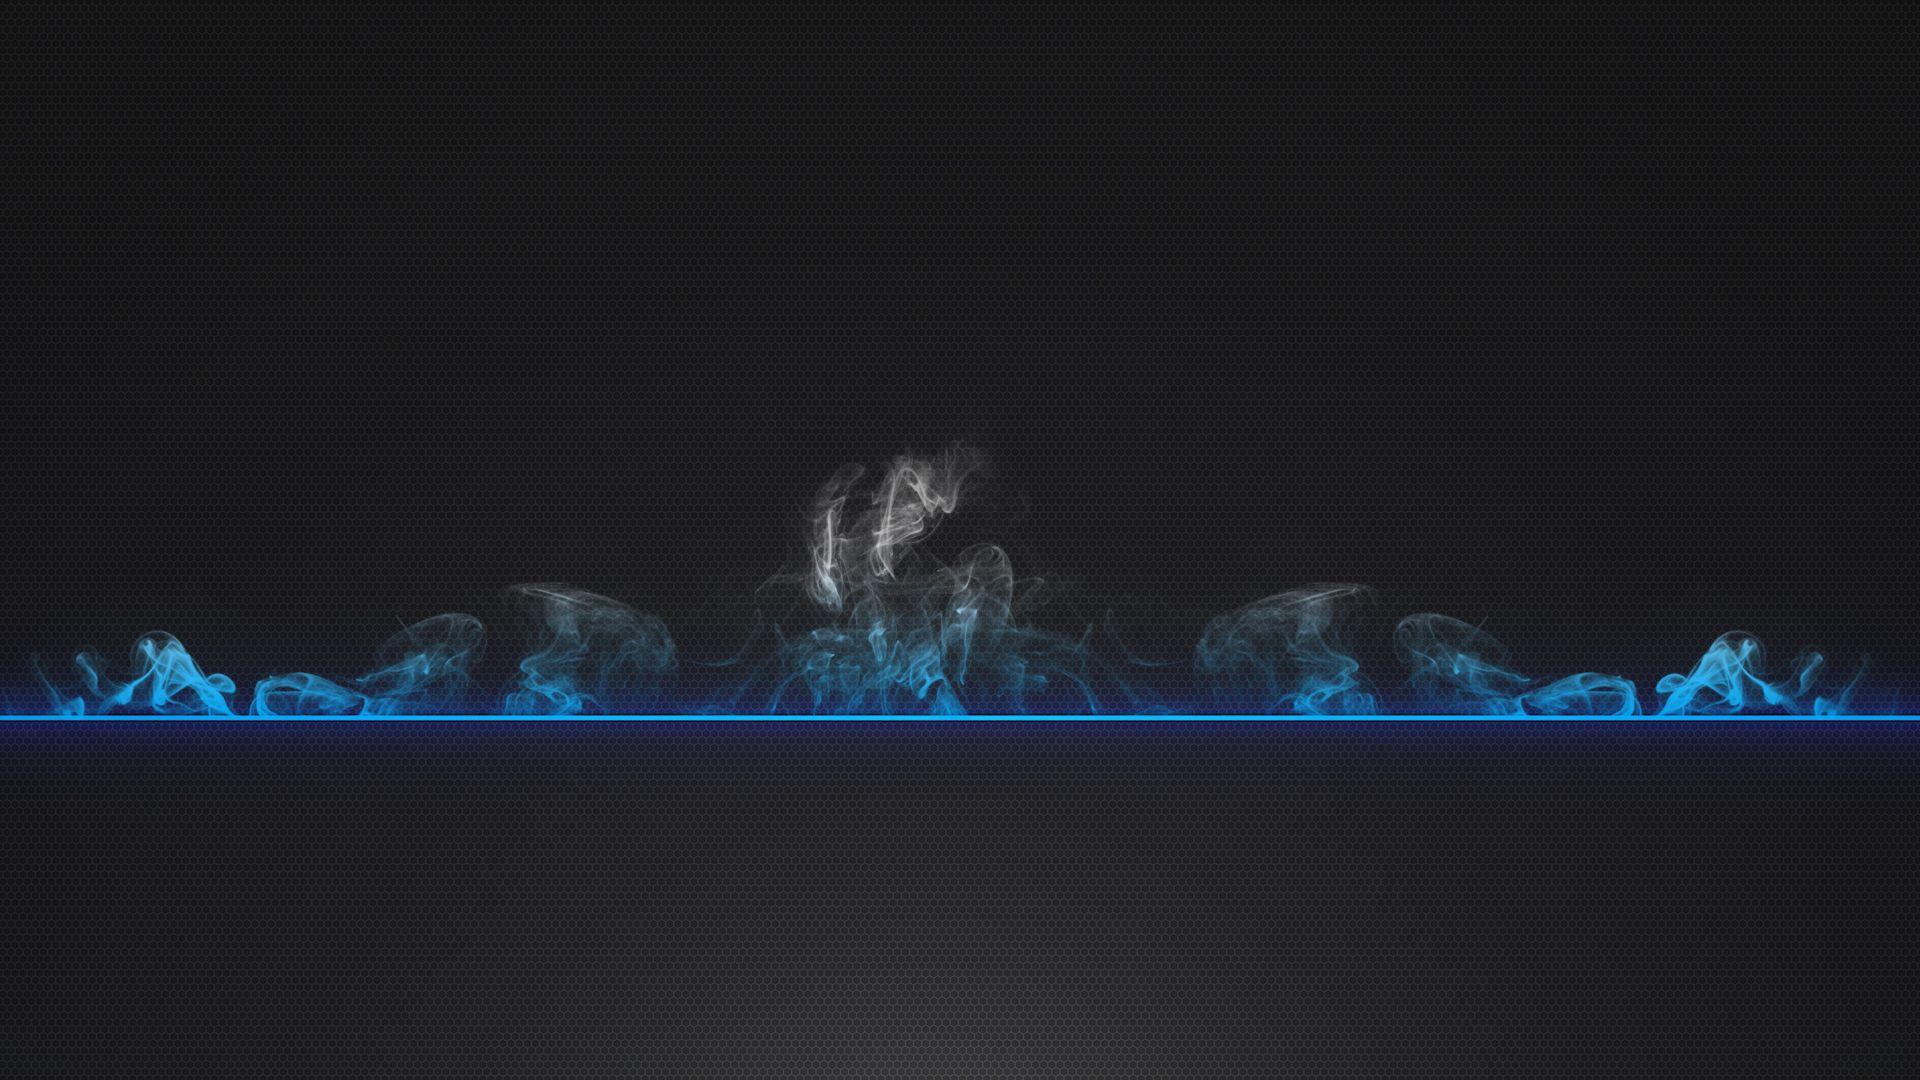 New Hd Banner Background Download - Banner aja